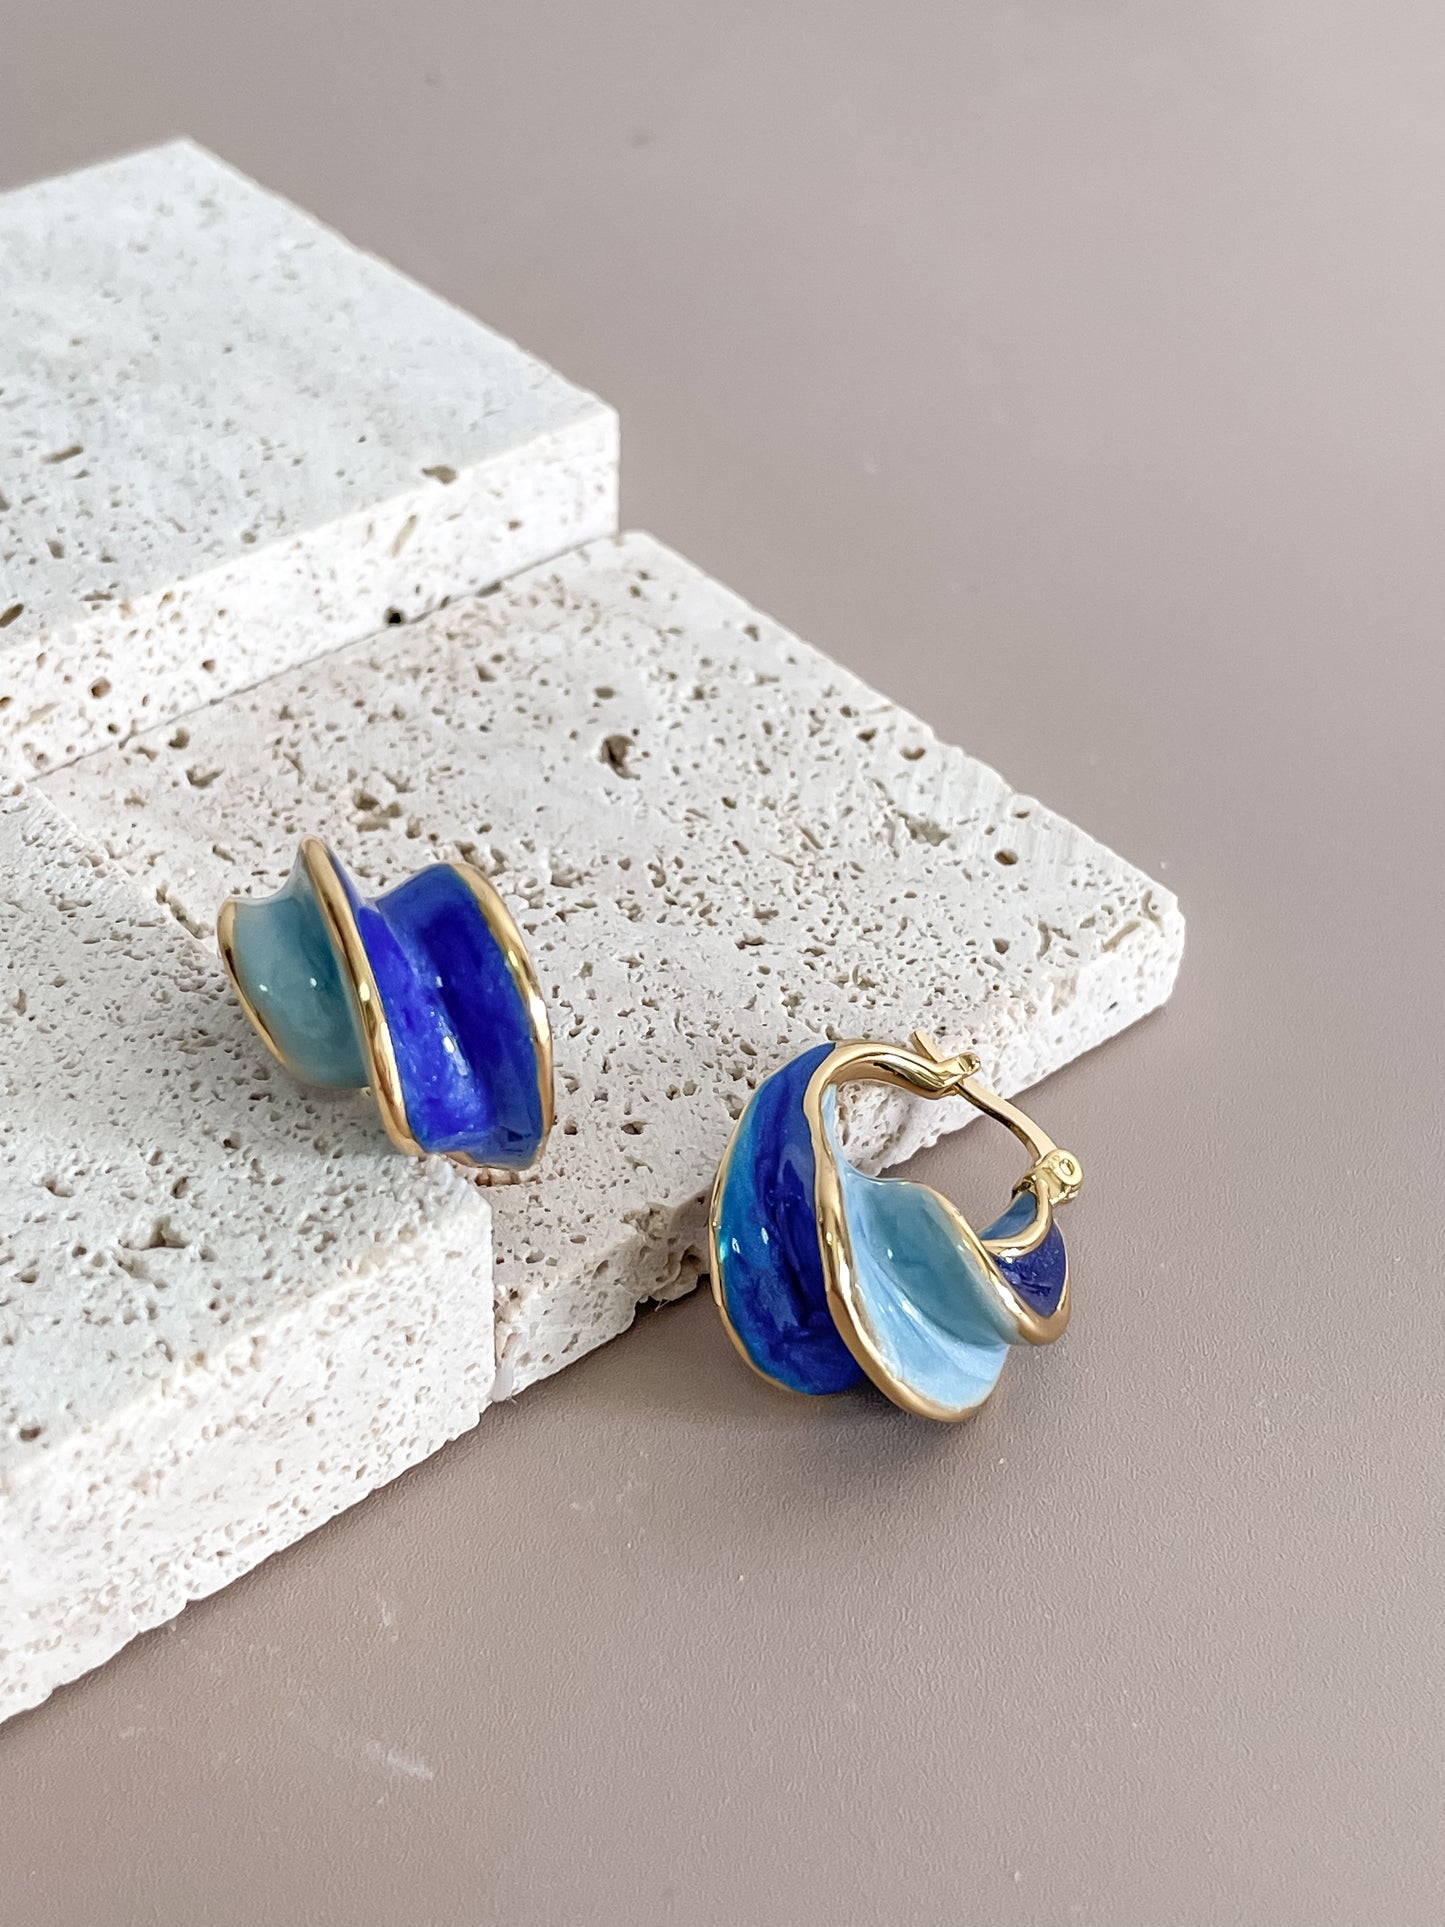 Blue Enamel and Gold Spiral Ear Hoops